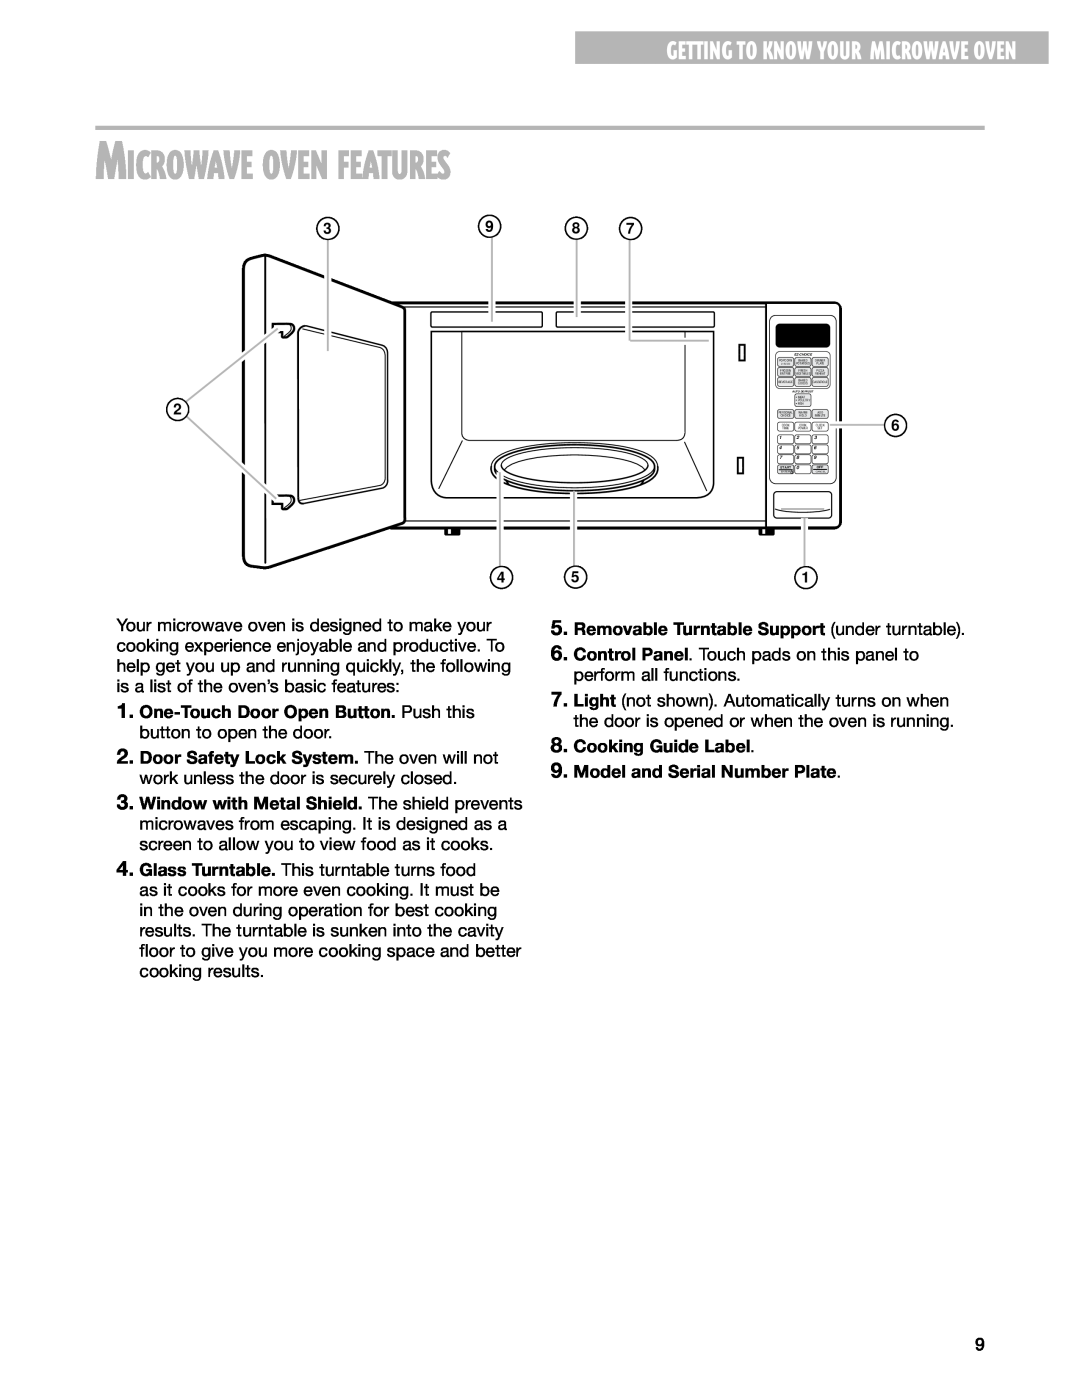 Whirlpool MT1130SG, MT1151SG, MT1131SG installation instructions Microwave Oven Features, Getting To Know Your Microwave Oven 